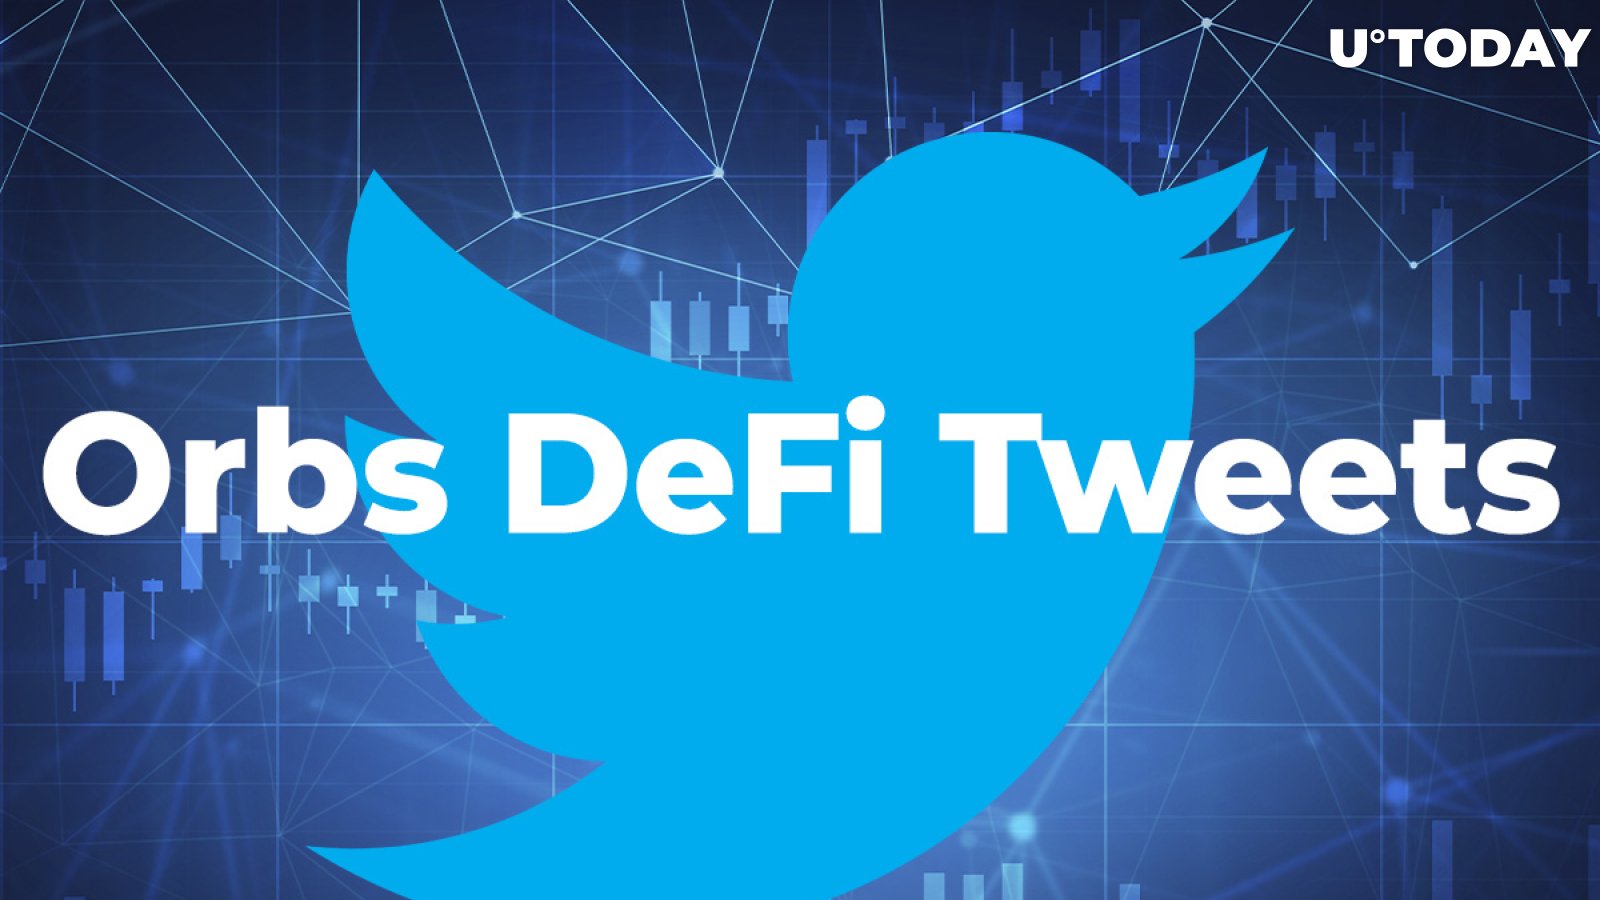 Orbs DeFi Tweets Dashboard Allows You to Receive Real-Time Data on Crypto Twitter